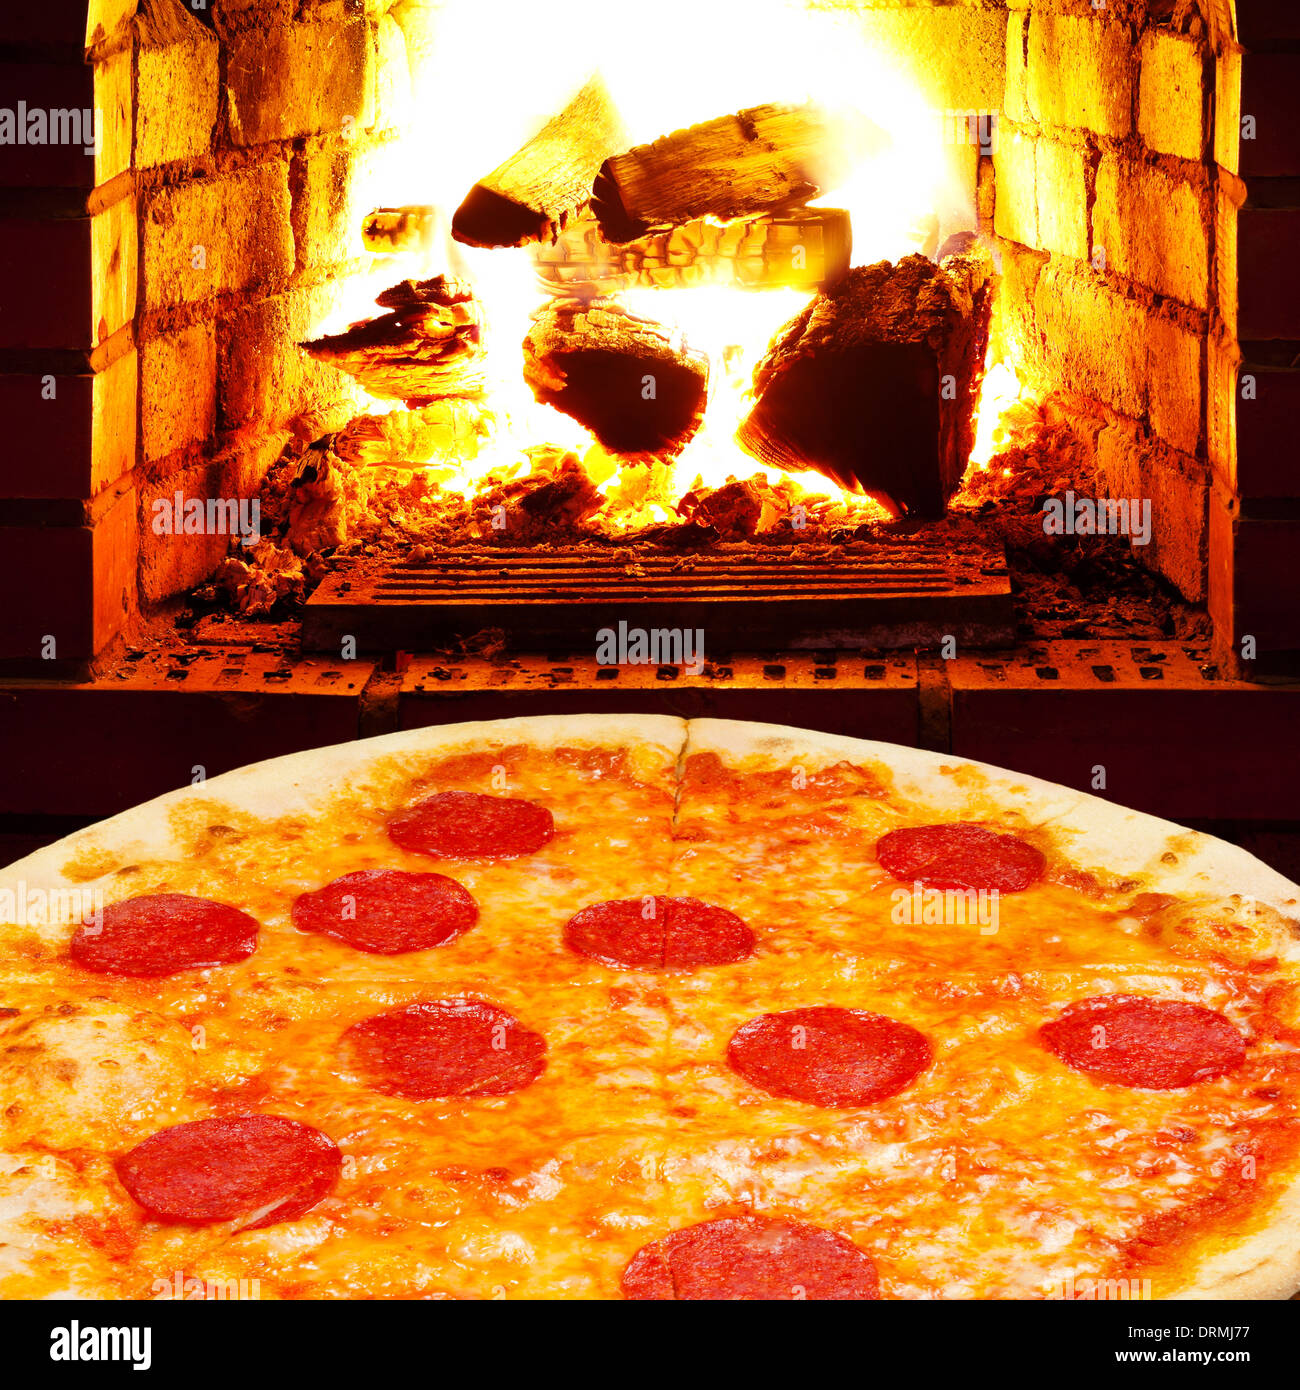 italian pizza with salami and open fire in wood burning stove Stock Photo